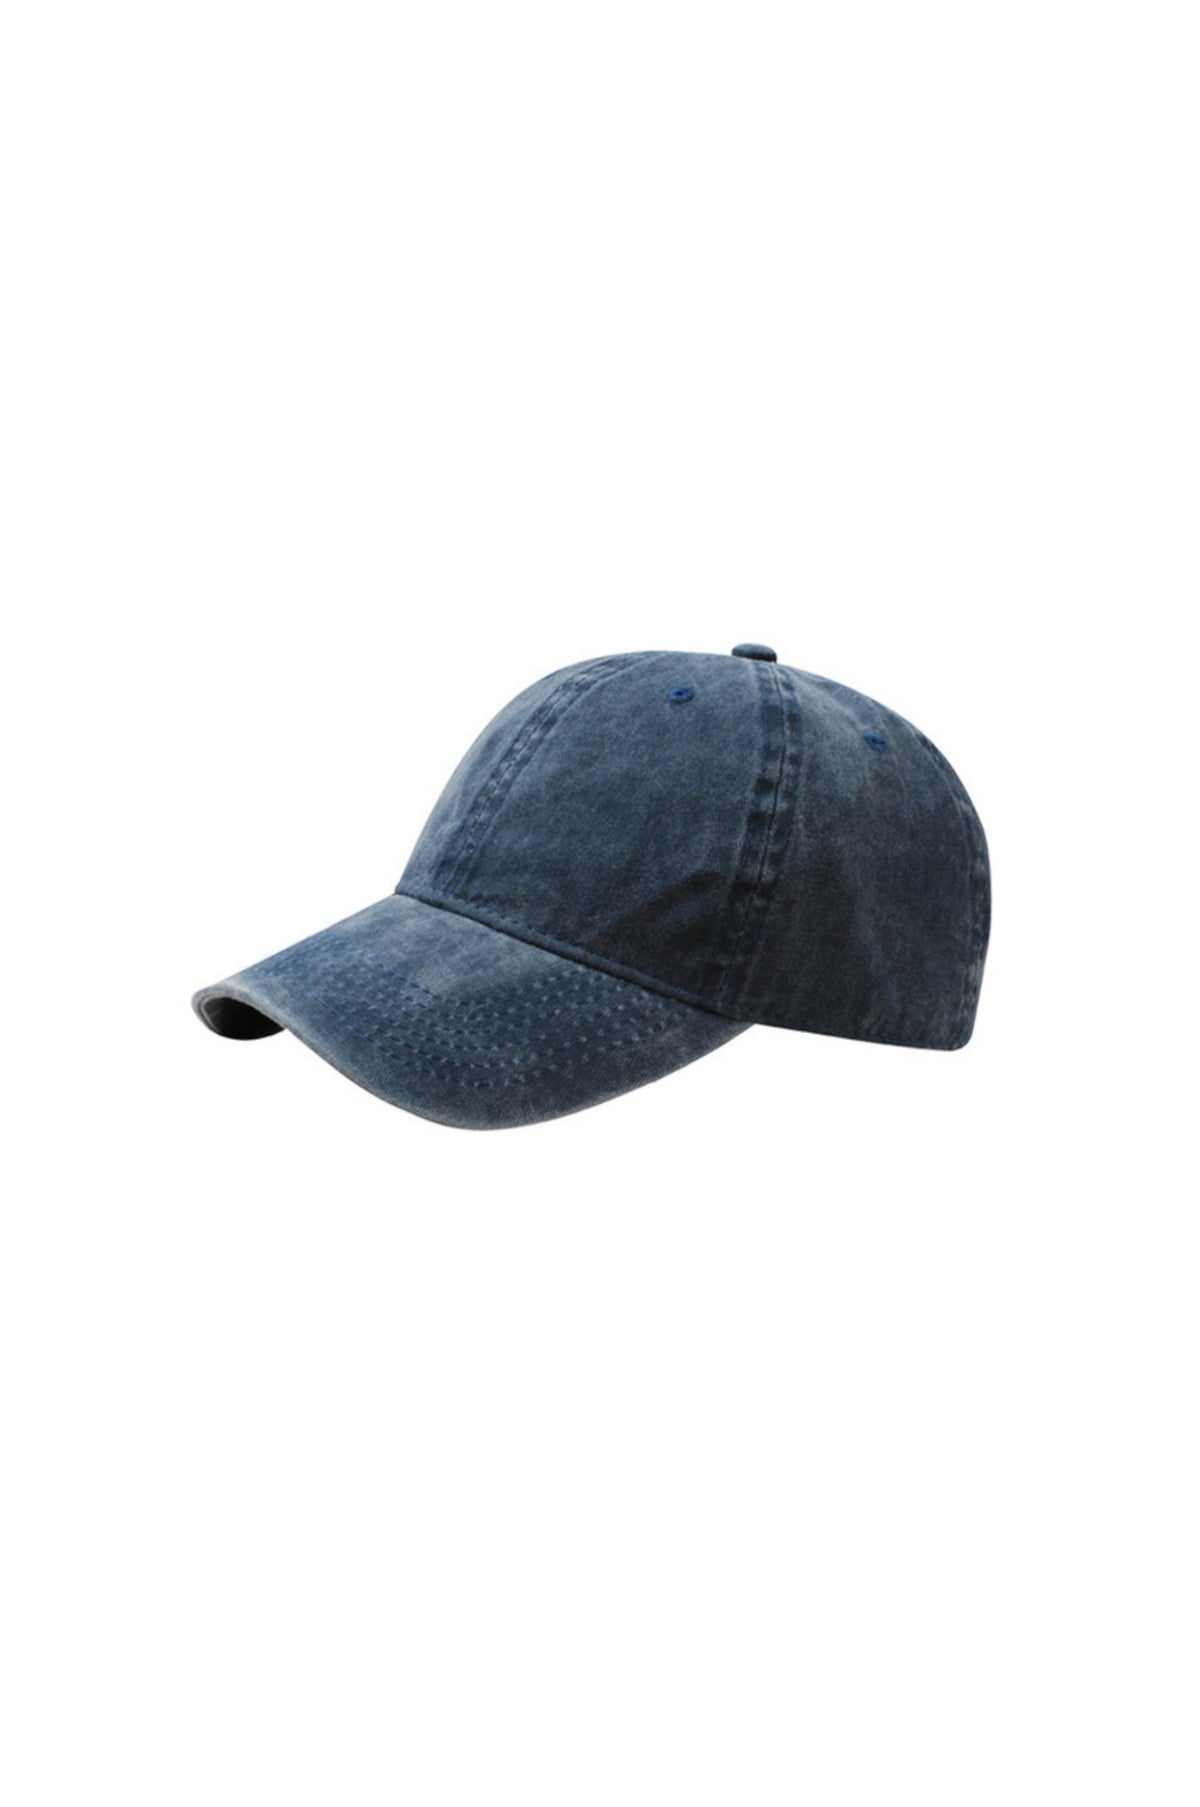 Navy blue washed cap